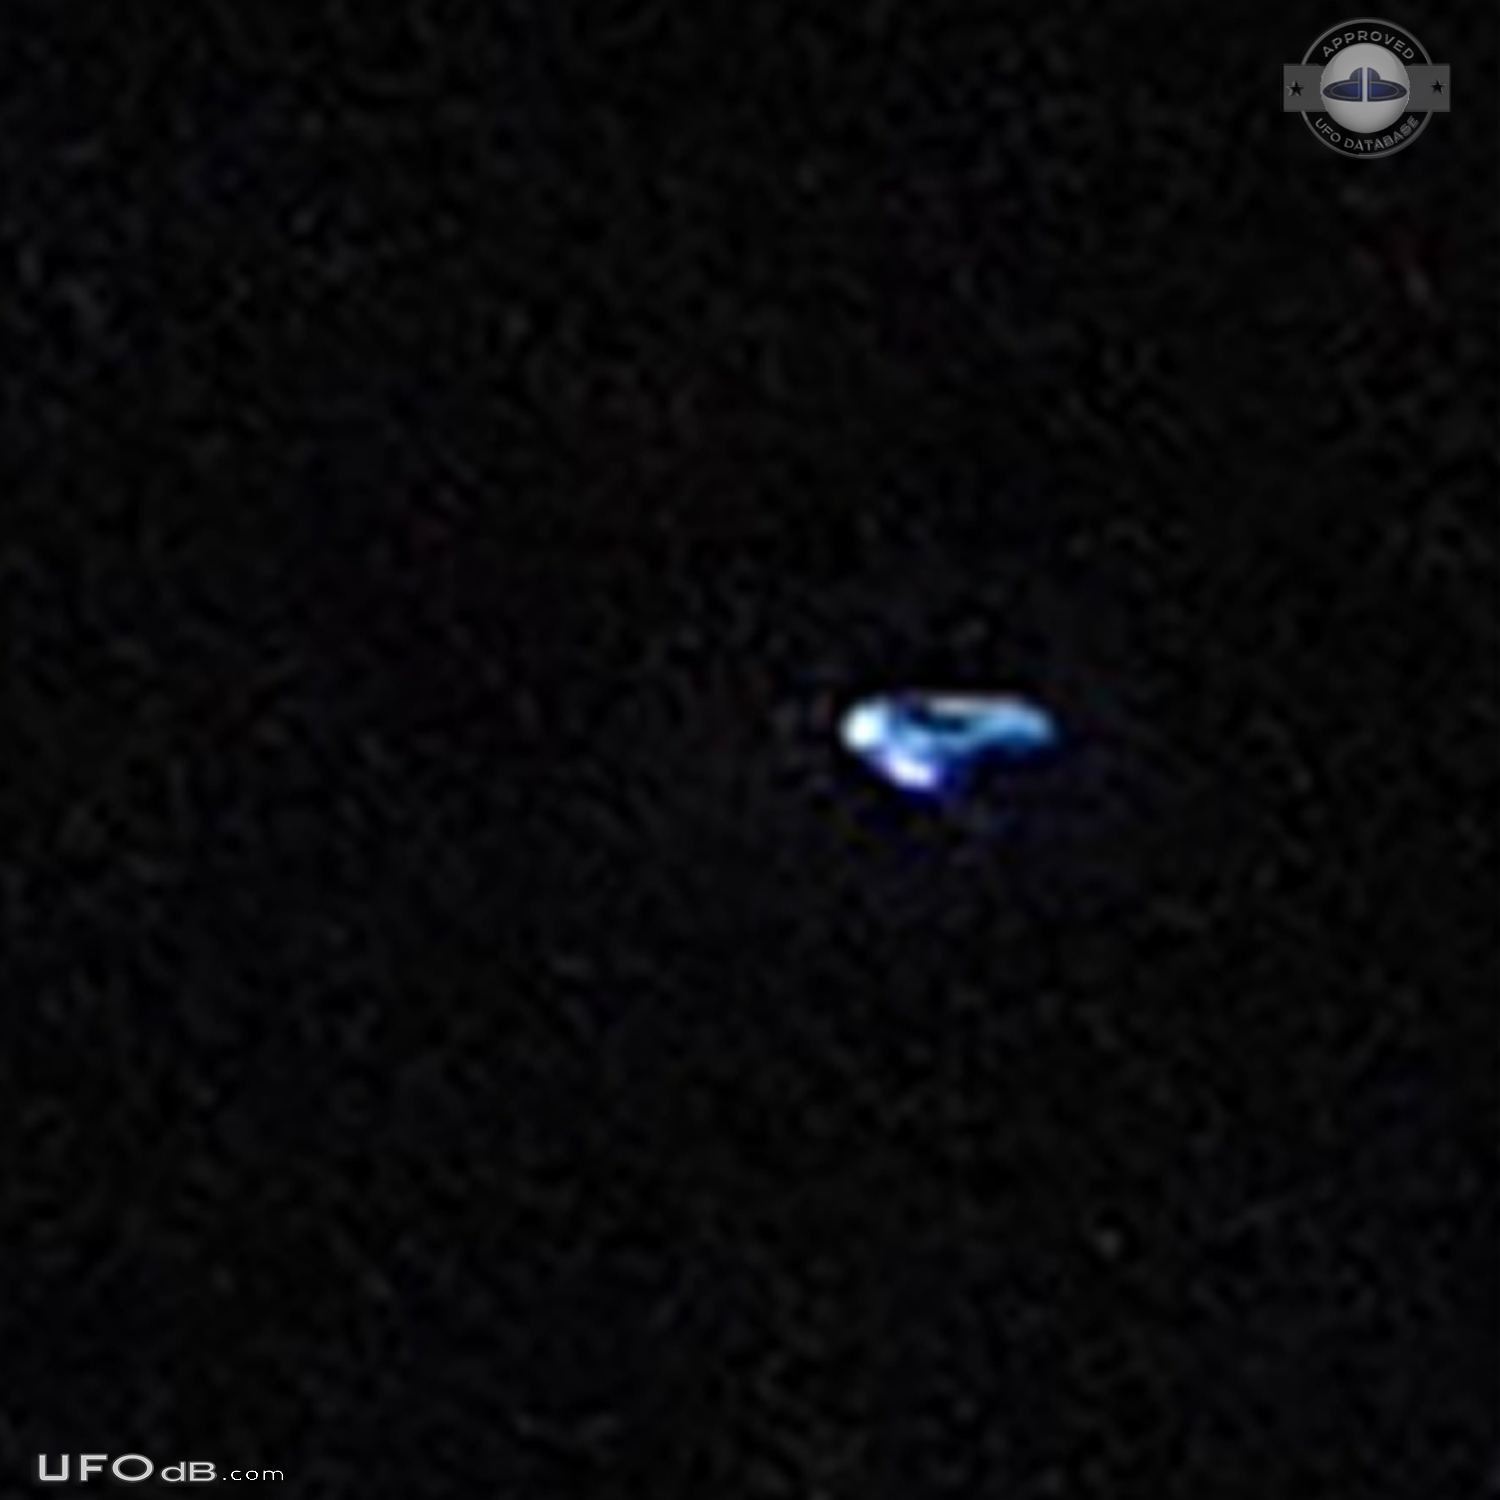 During meditation he discovered UFO appearing on the shot - Singapore  UFO Picture #794-4